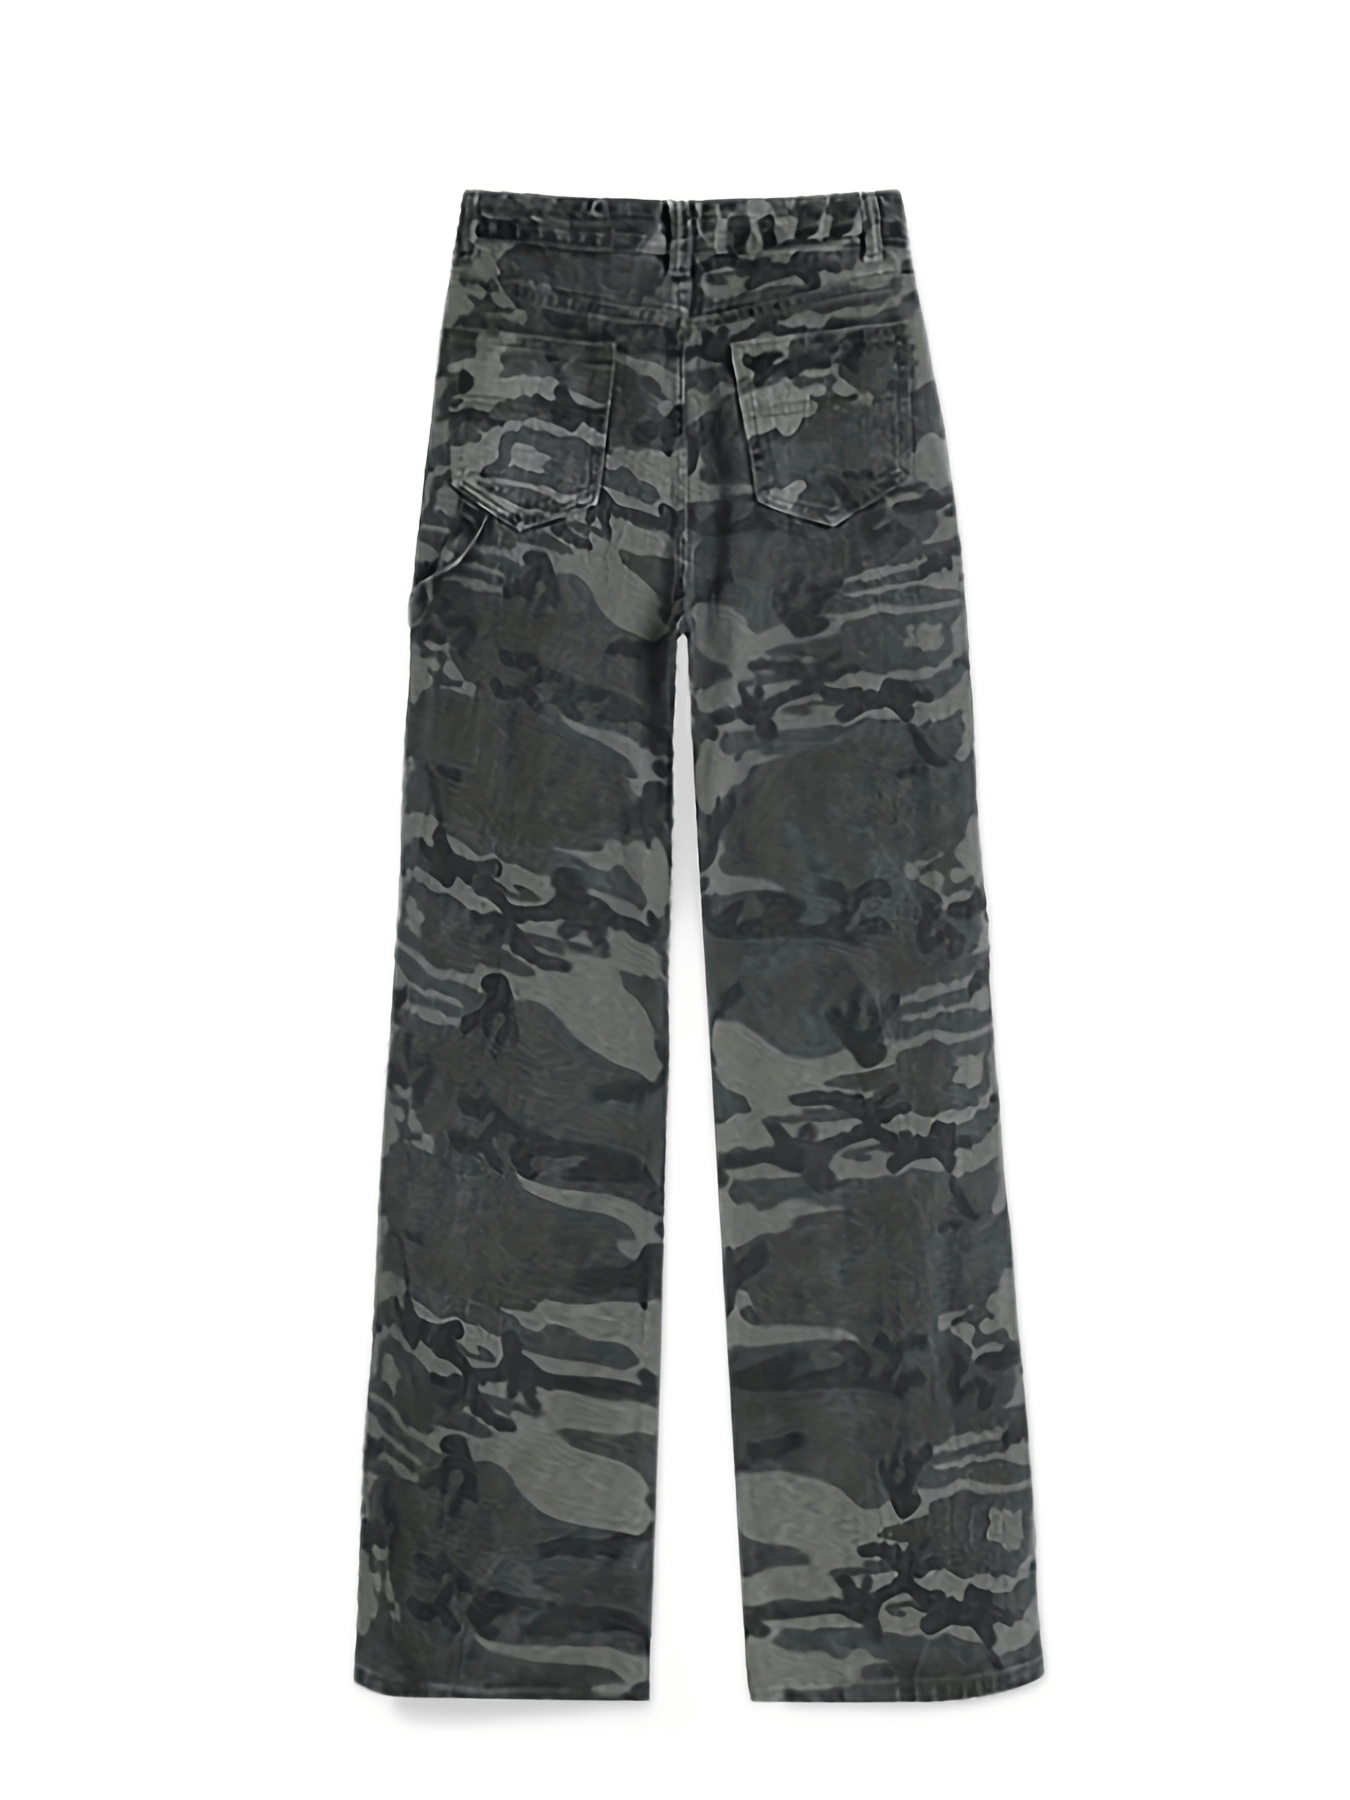 Buy the NWT Womens Black Gray Camouflage High-Rise Straight Leg Cropped  Pants Sz 10